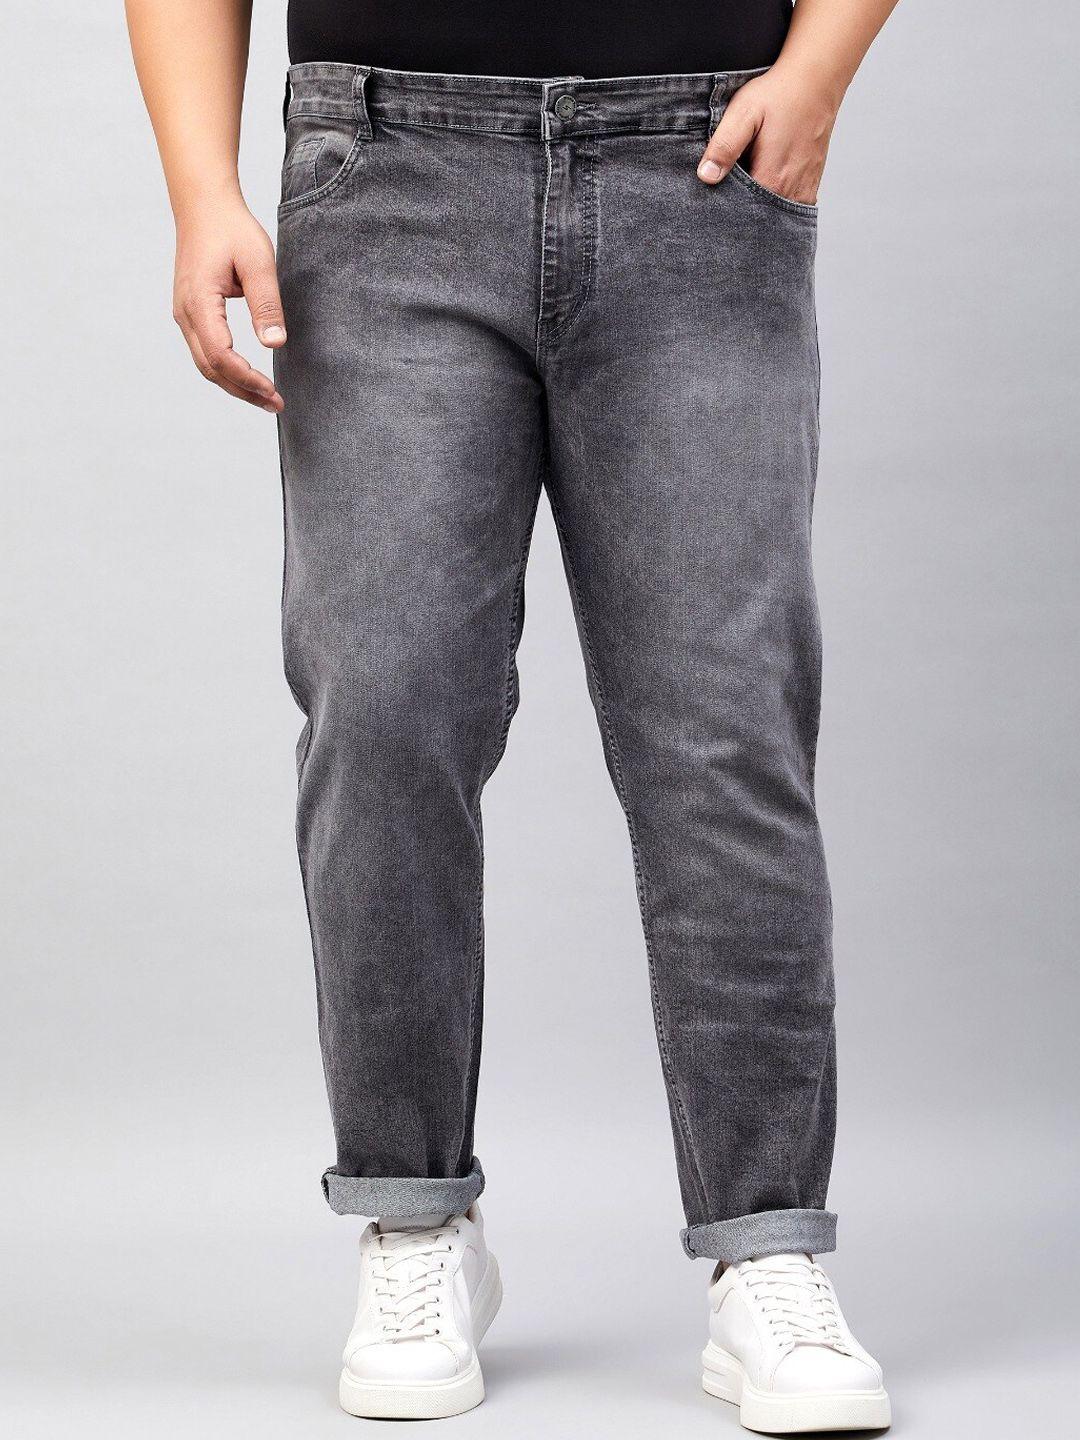 studio-nexx-men-tapered-fit-clean-look-light-fade-cotton-jeans